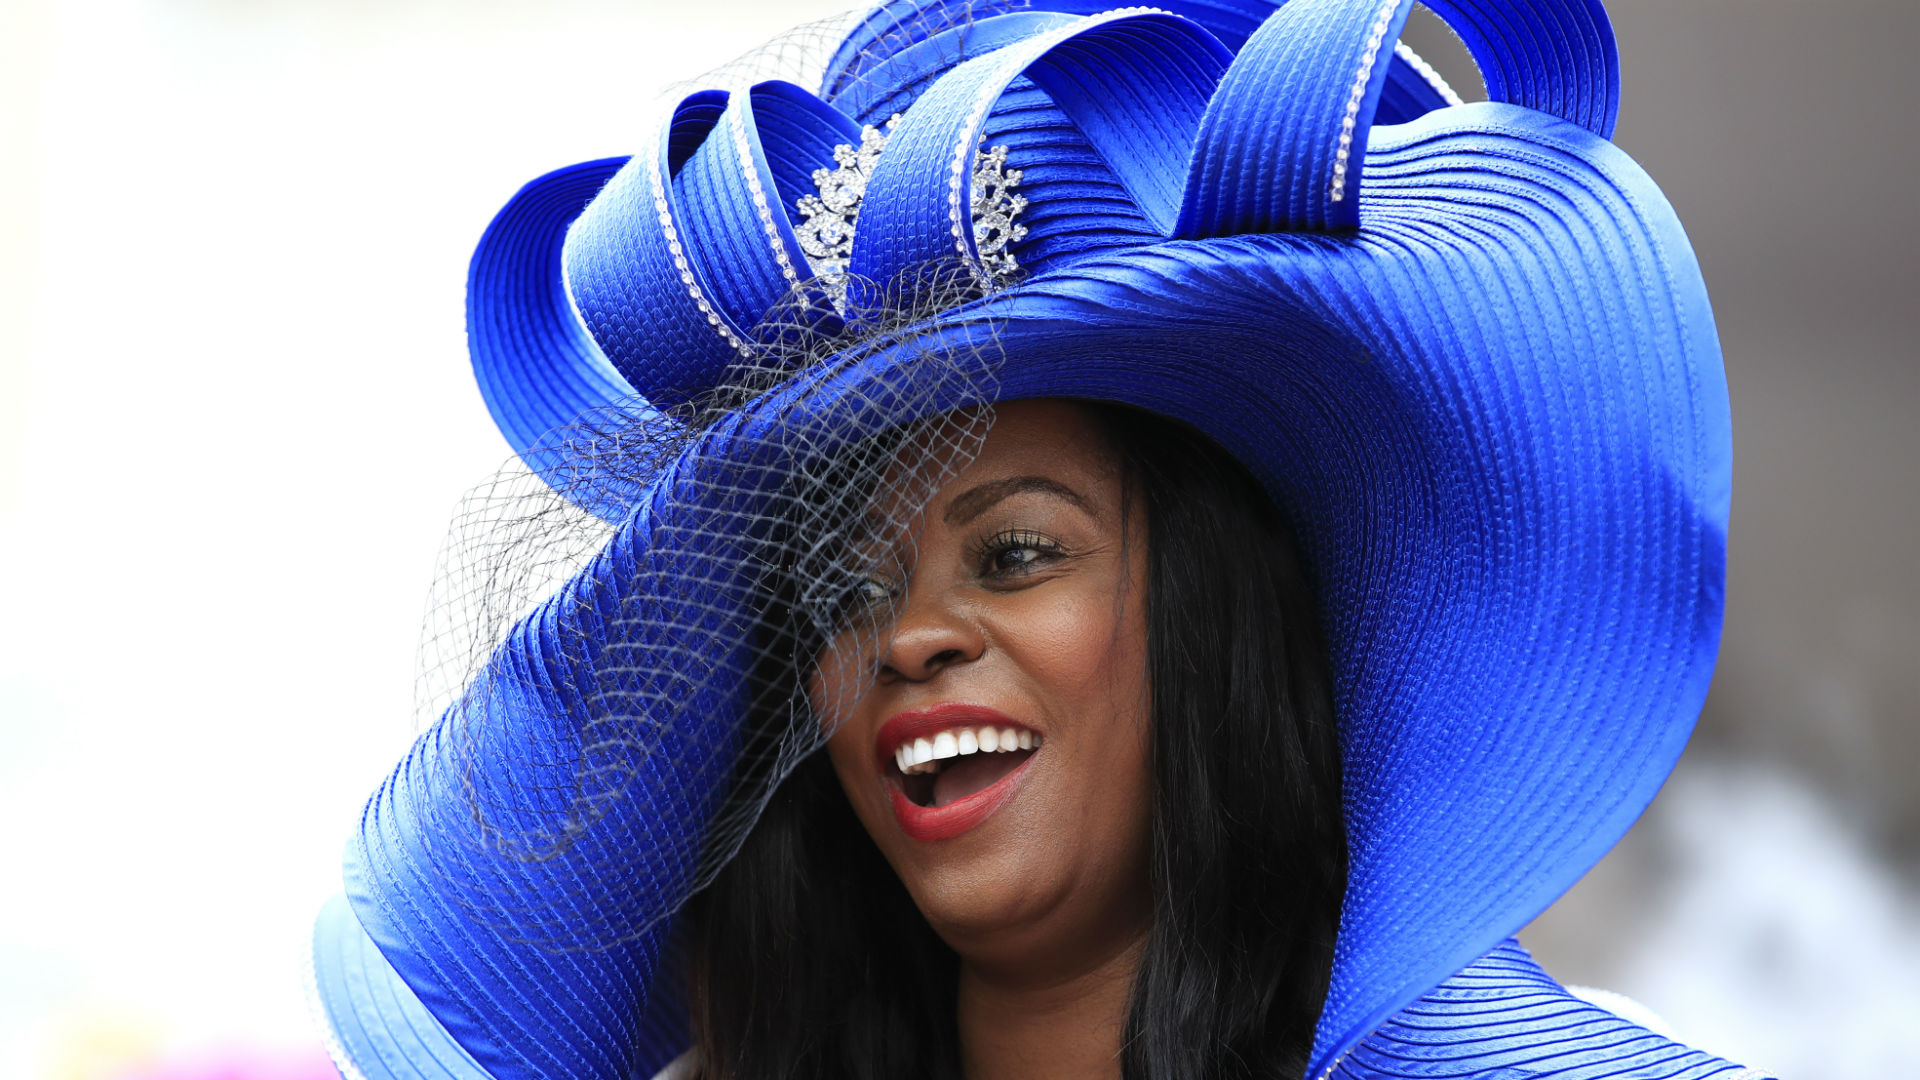 The best and most outlandish hats from the 2019 Kentucky Derby